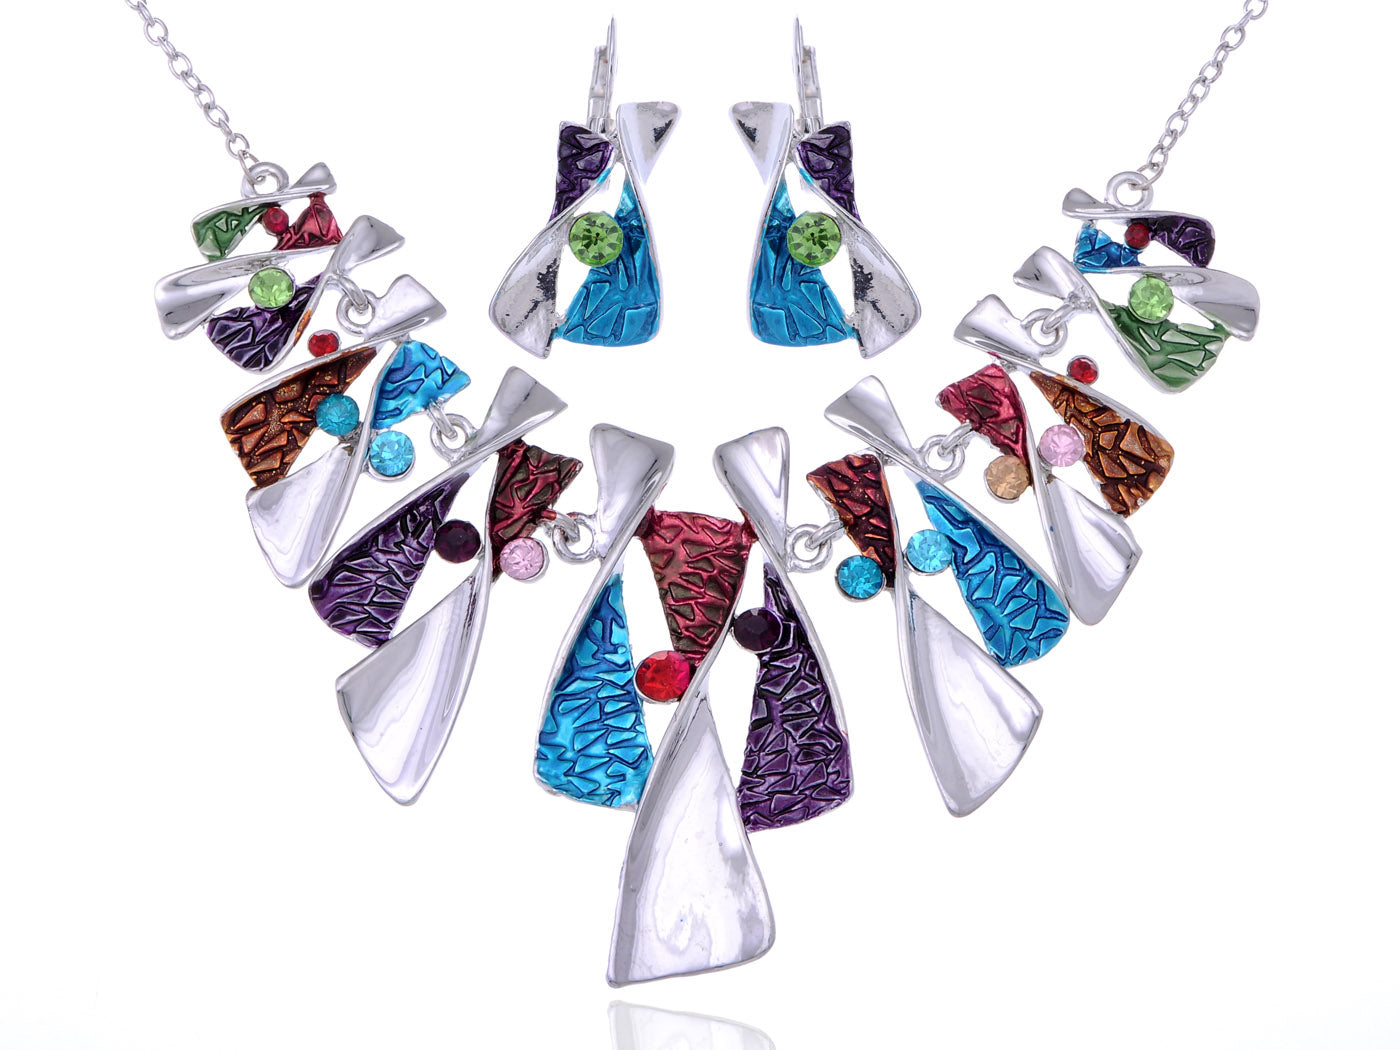 Colorful Pieces Abstract Geometric Shapes Jewelry Necklace Earring Set